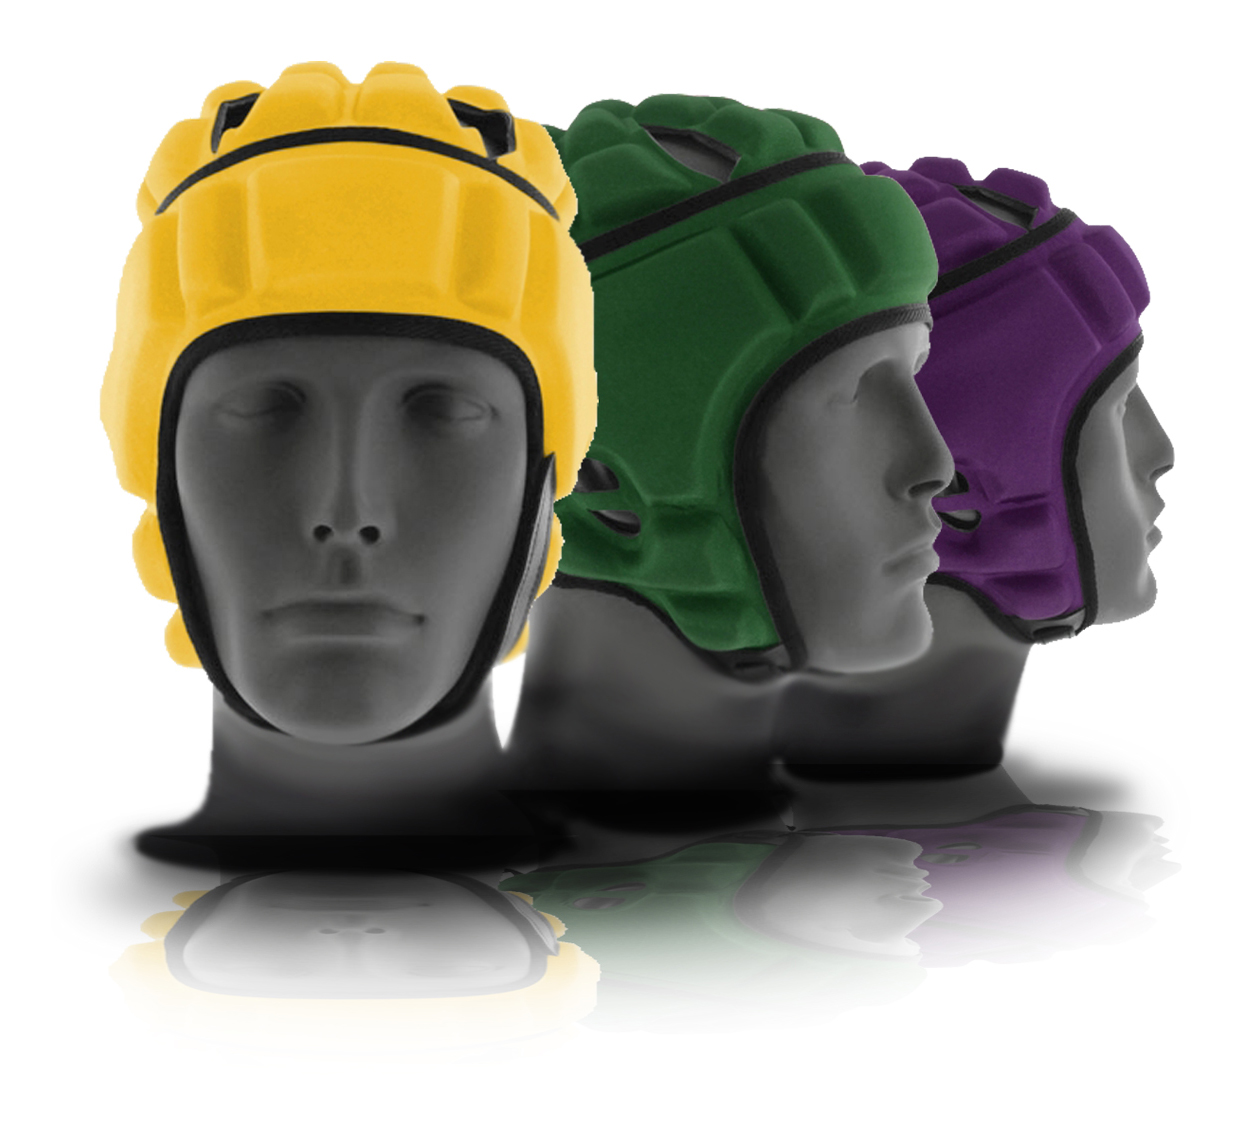 Protective Helmet Market Report Analyses 2019 Covers Stakeholders, Helmet Manufacturers, Production, Capacity, Value